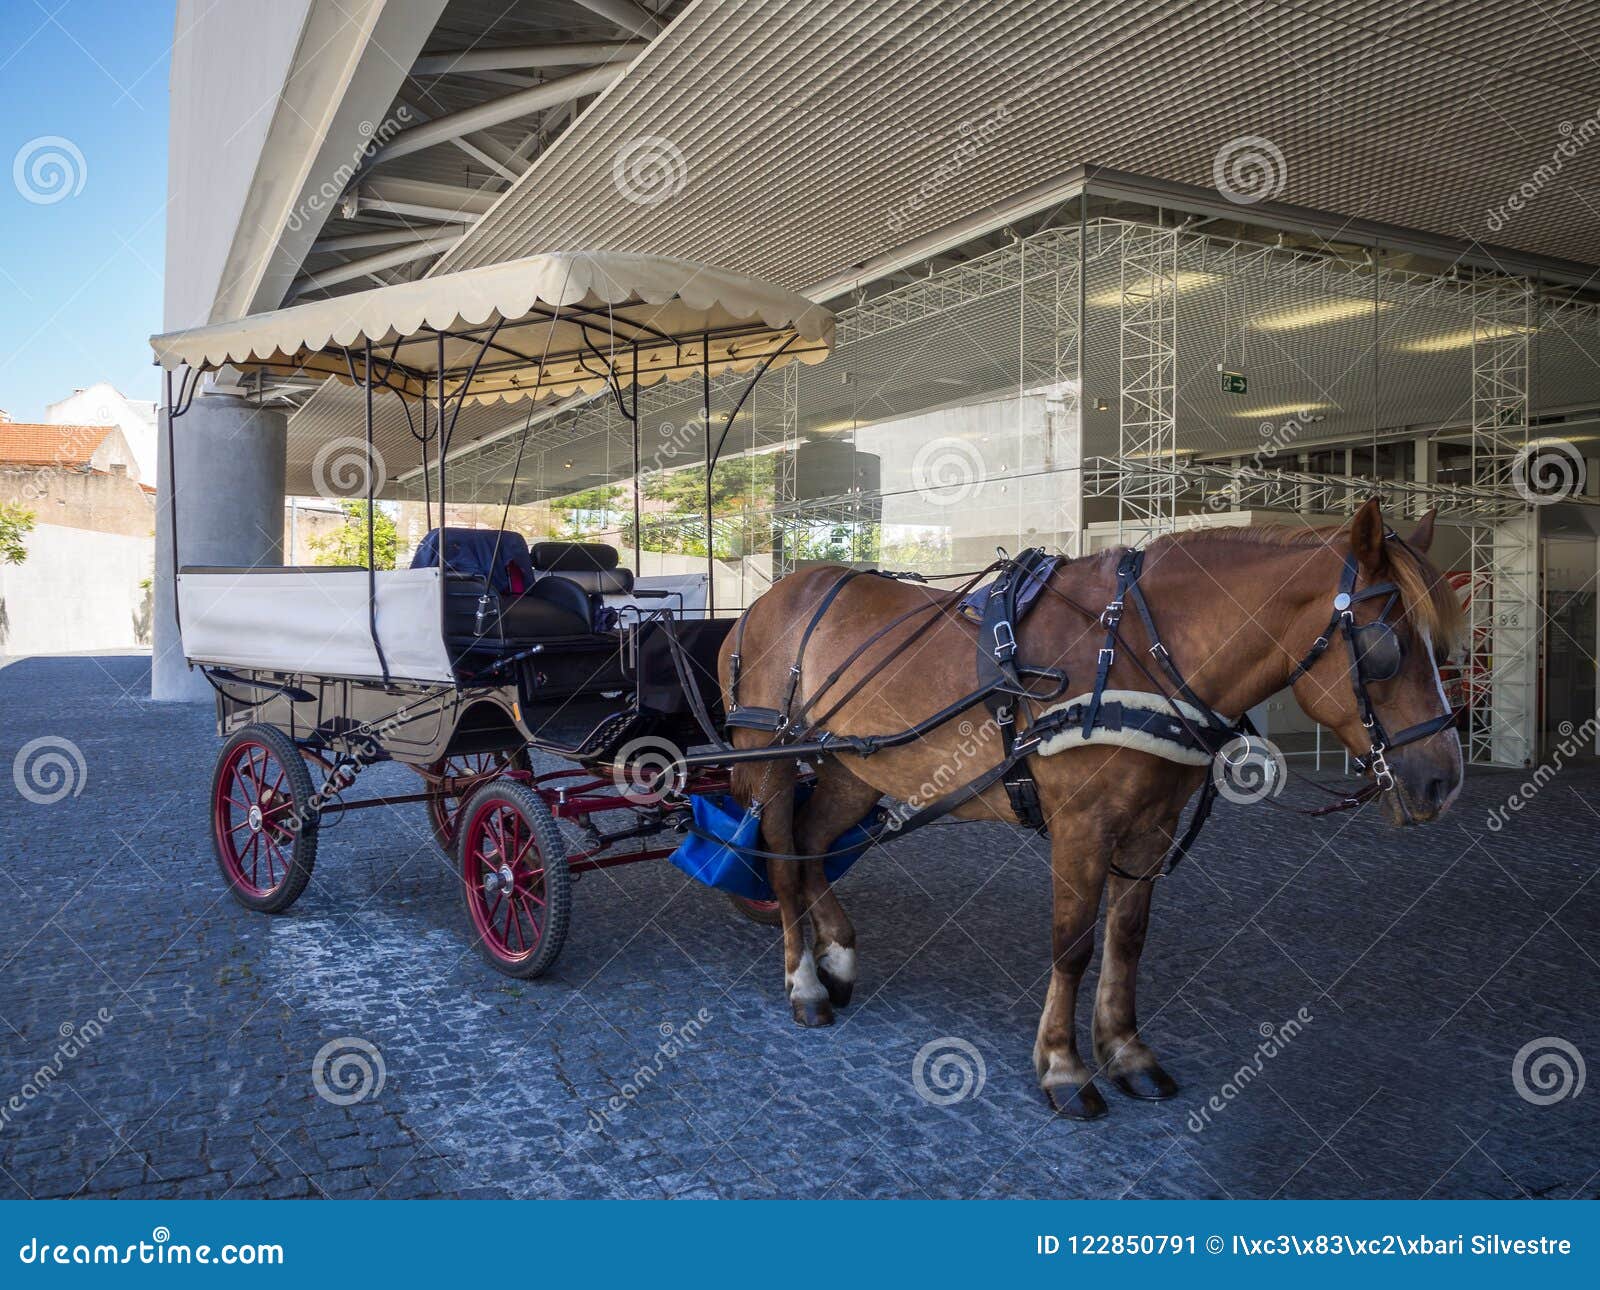 traditional horse and carriage near museu dos coches in lisbon